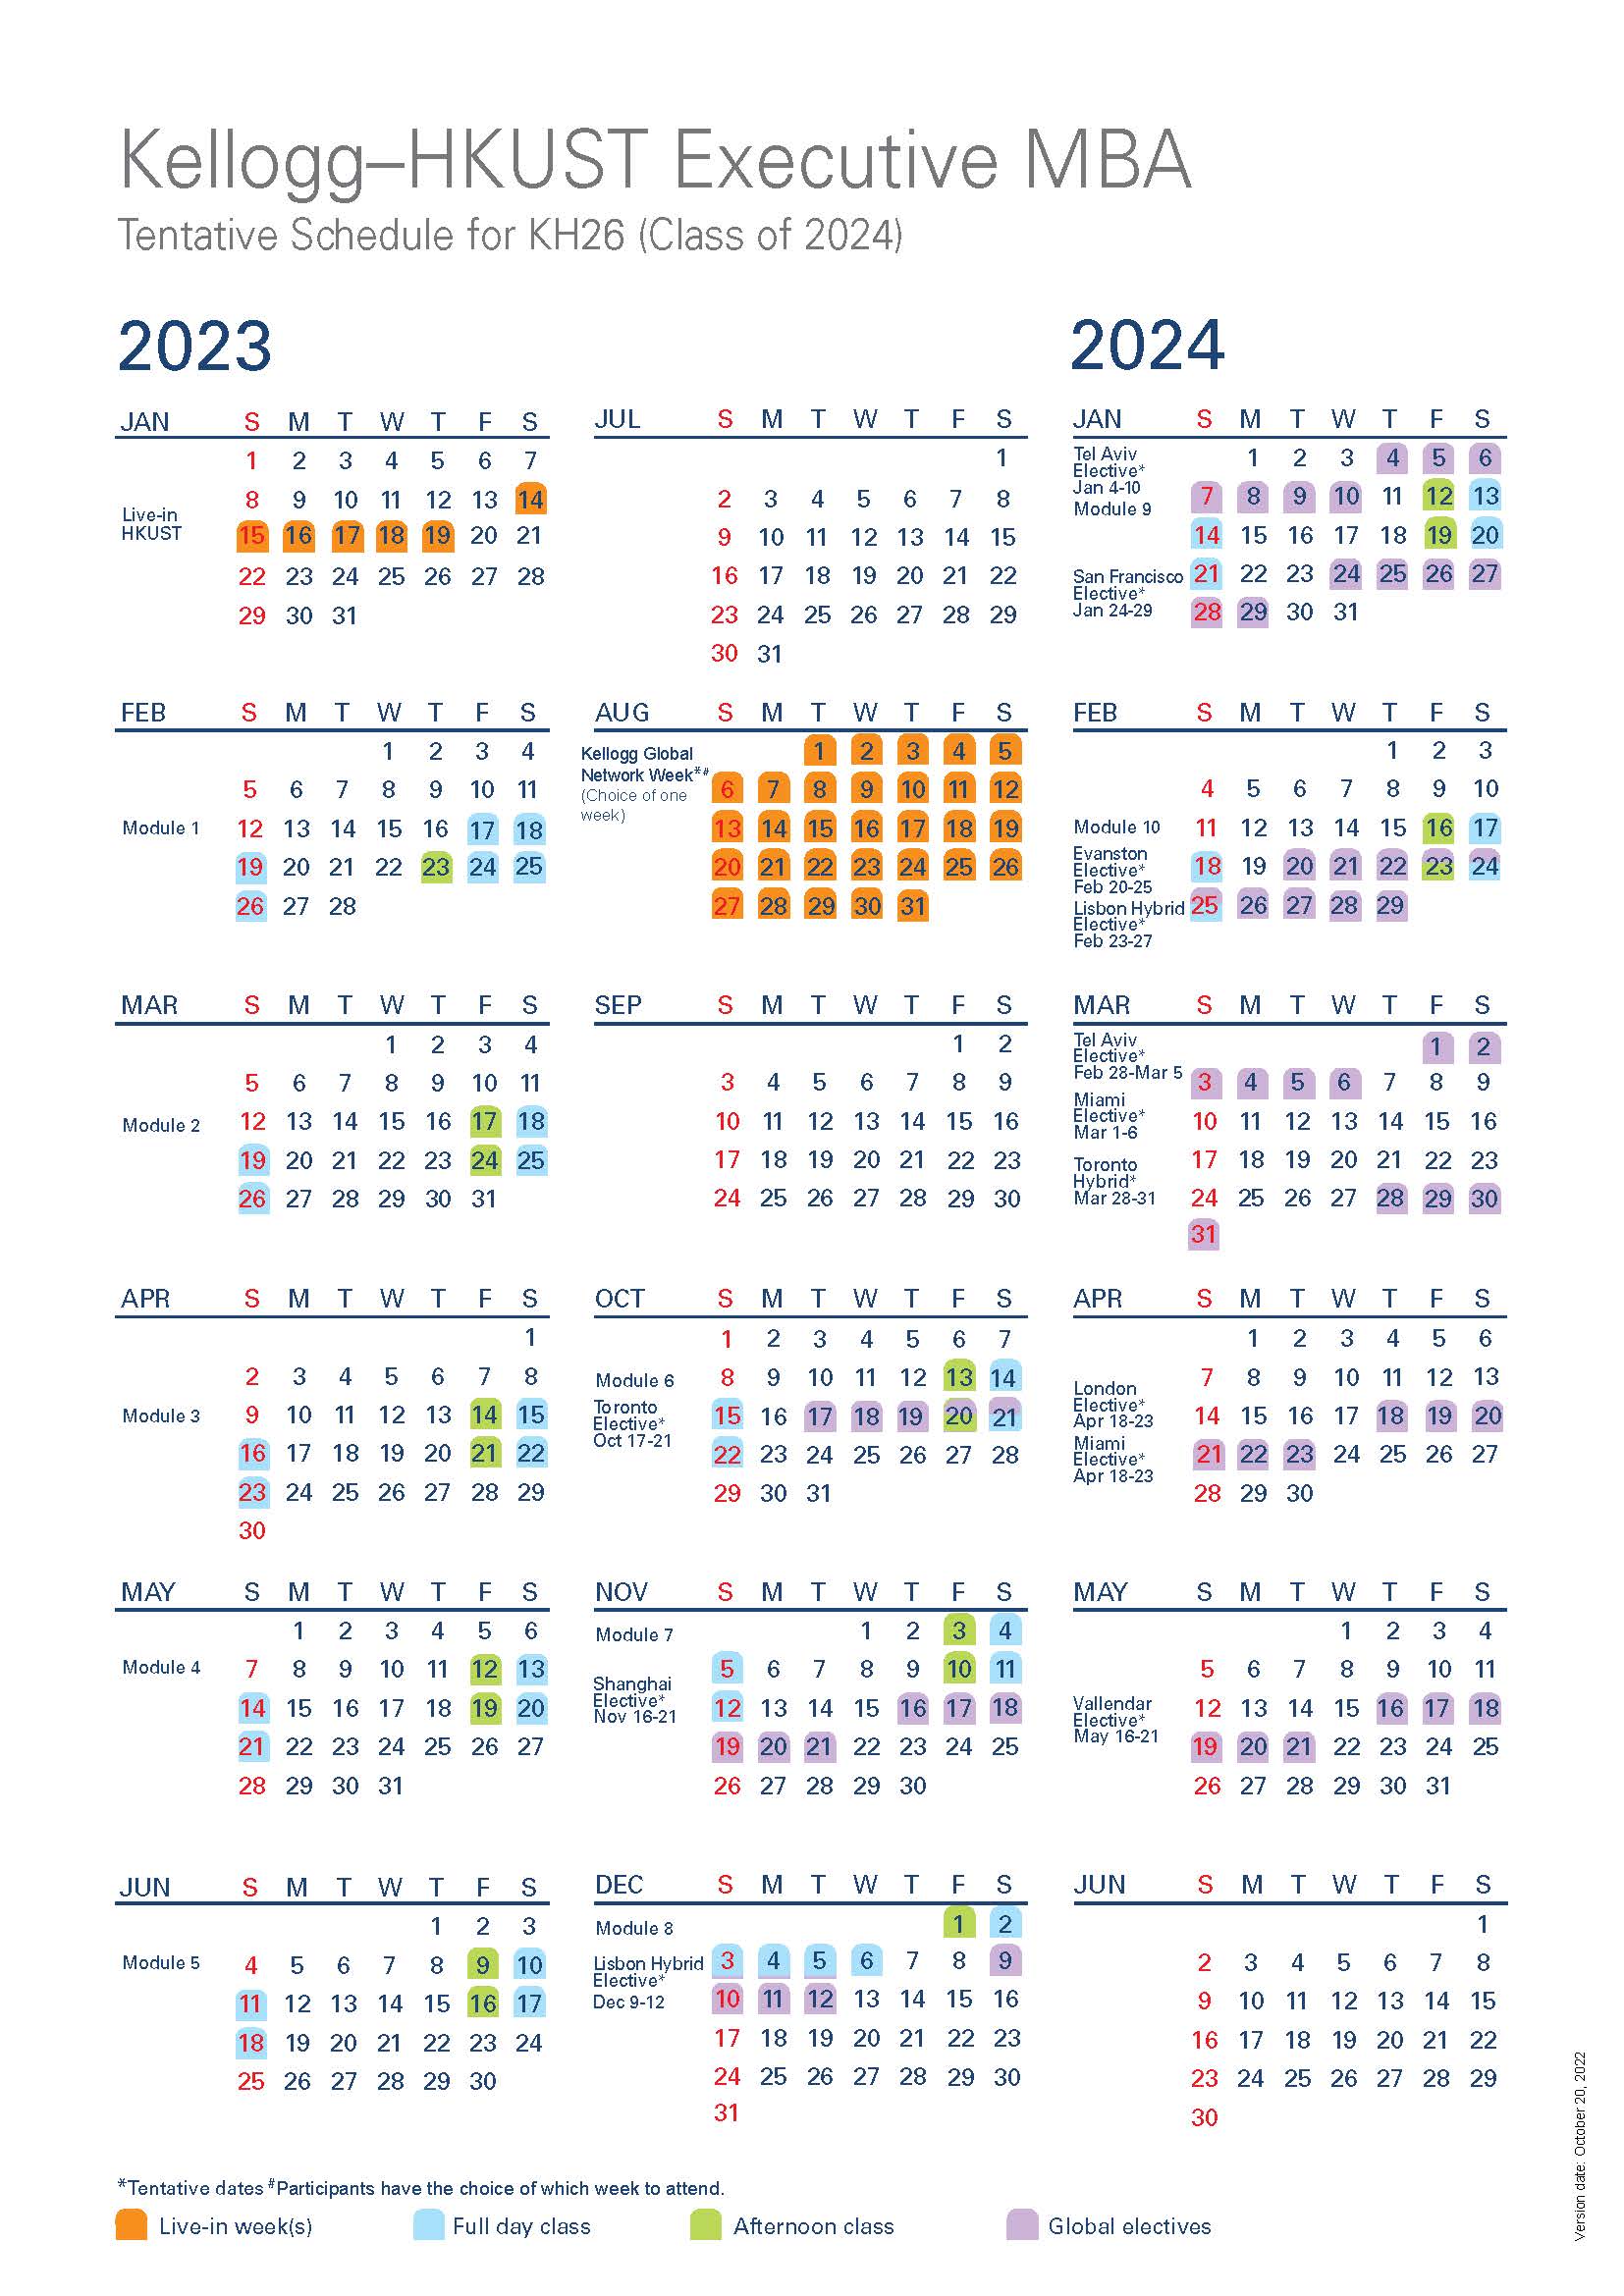 KH26_calendar_new_20220303 (without elective)_800px